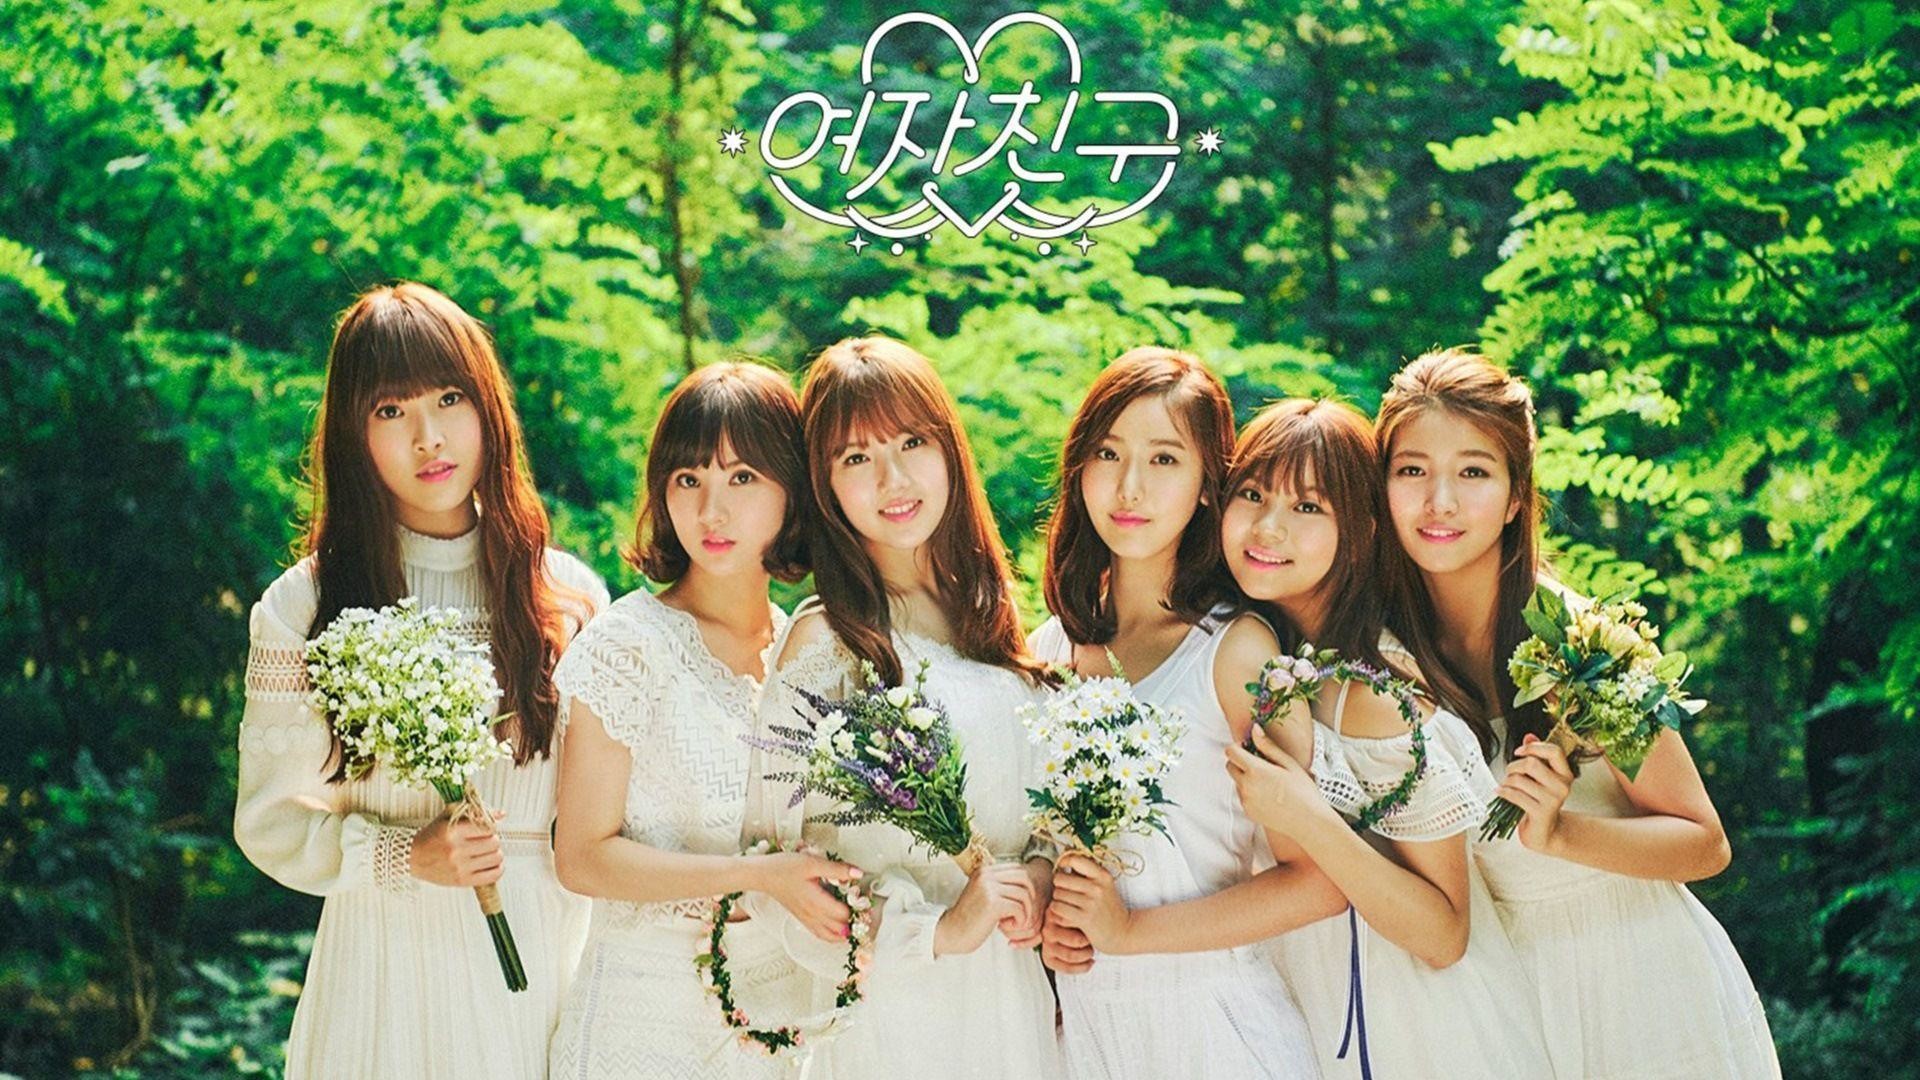 Gfriend HD Android Wallpapers - Wallpaper Cave